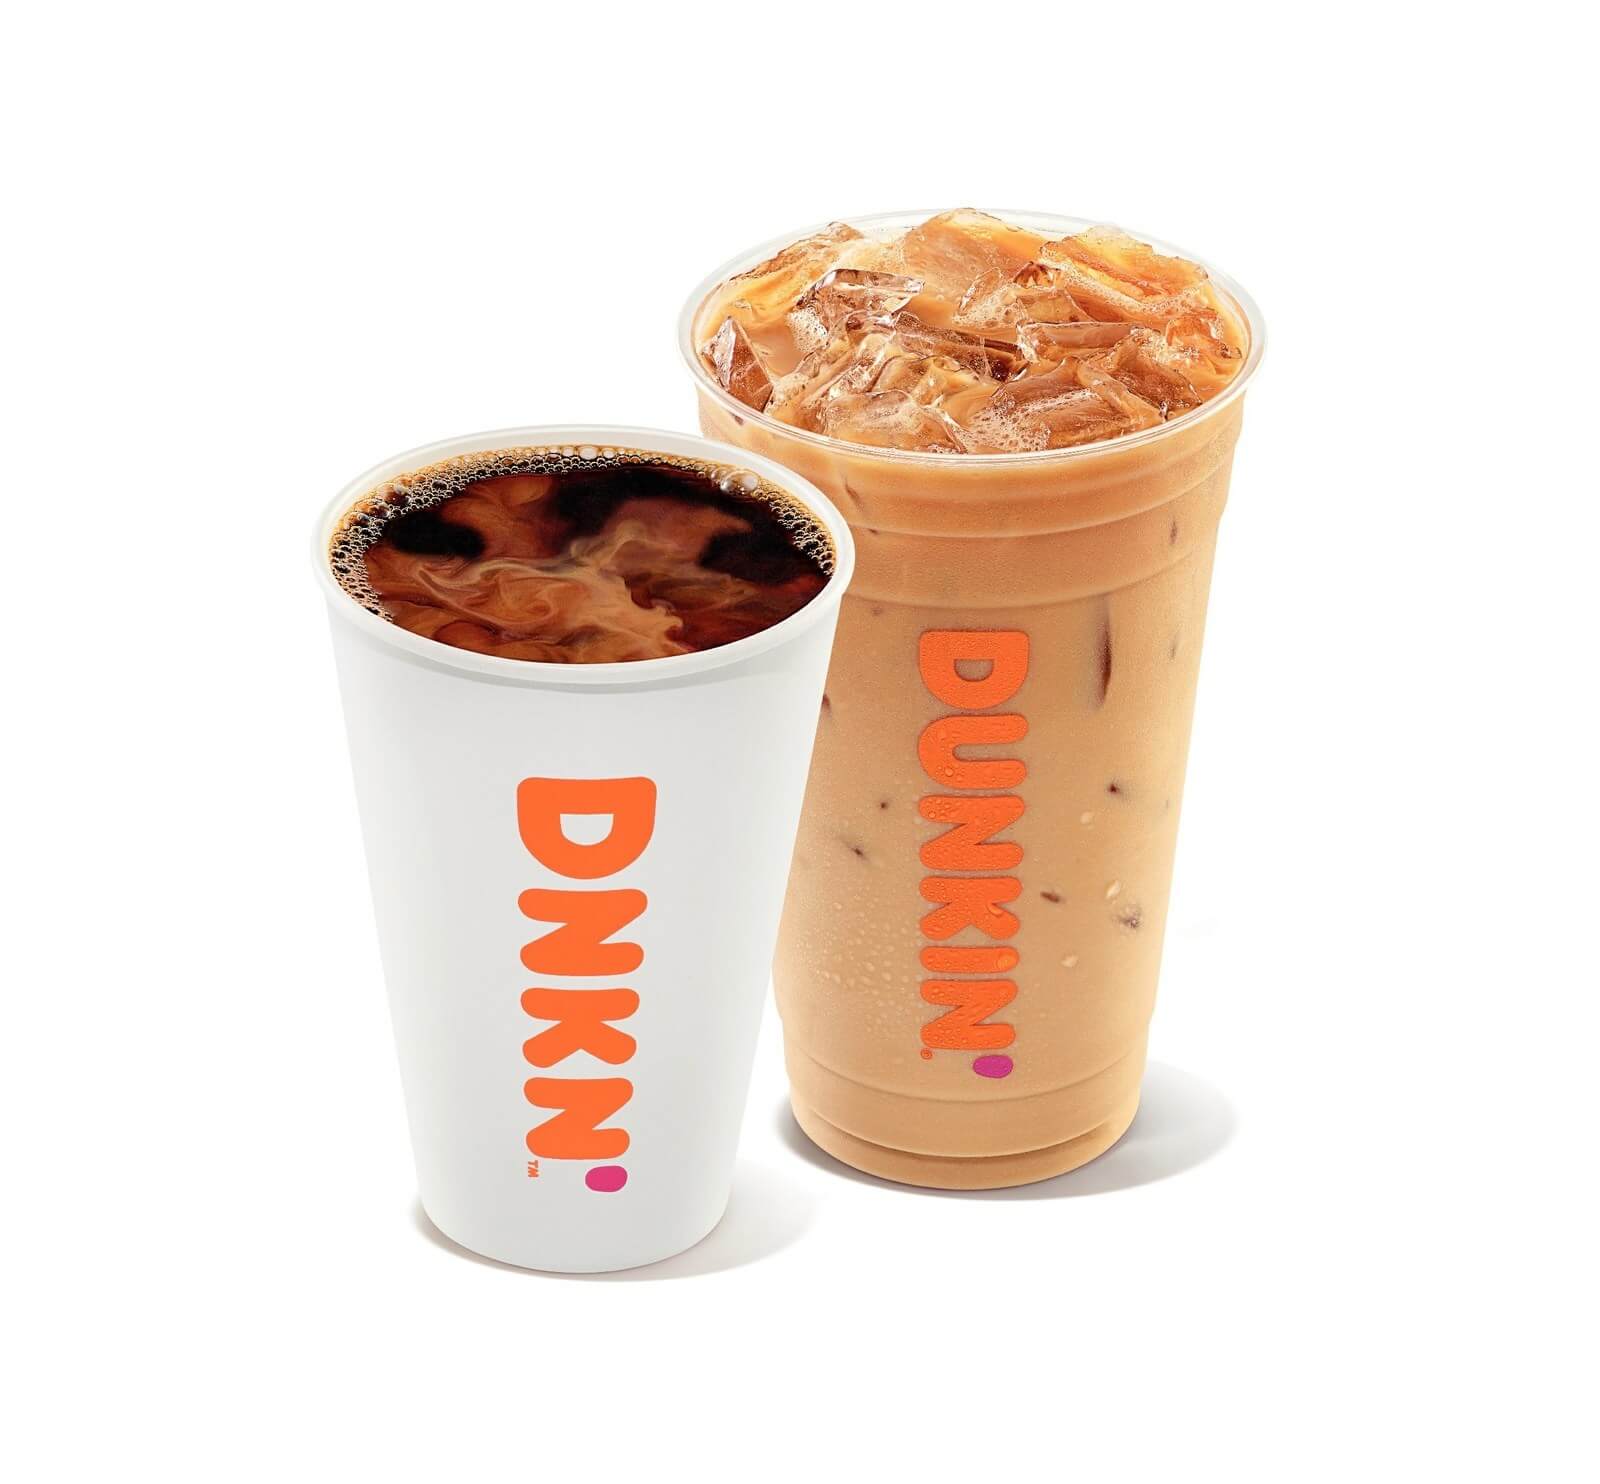 18-dunkin-donuts-flavor-shots-nutrition-facts